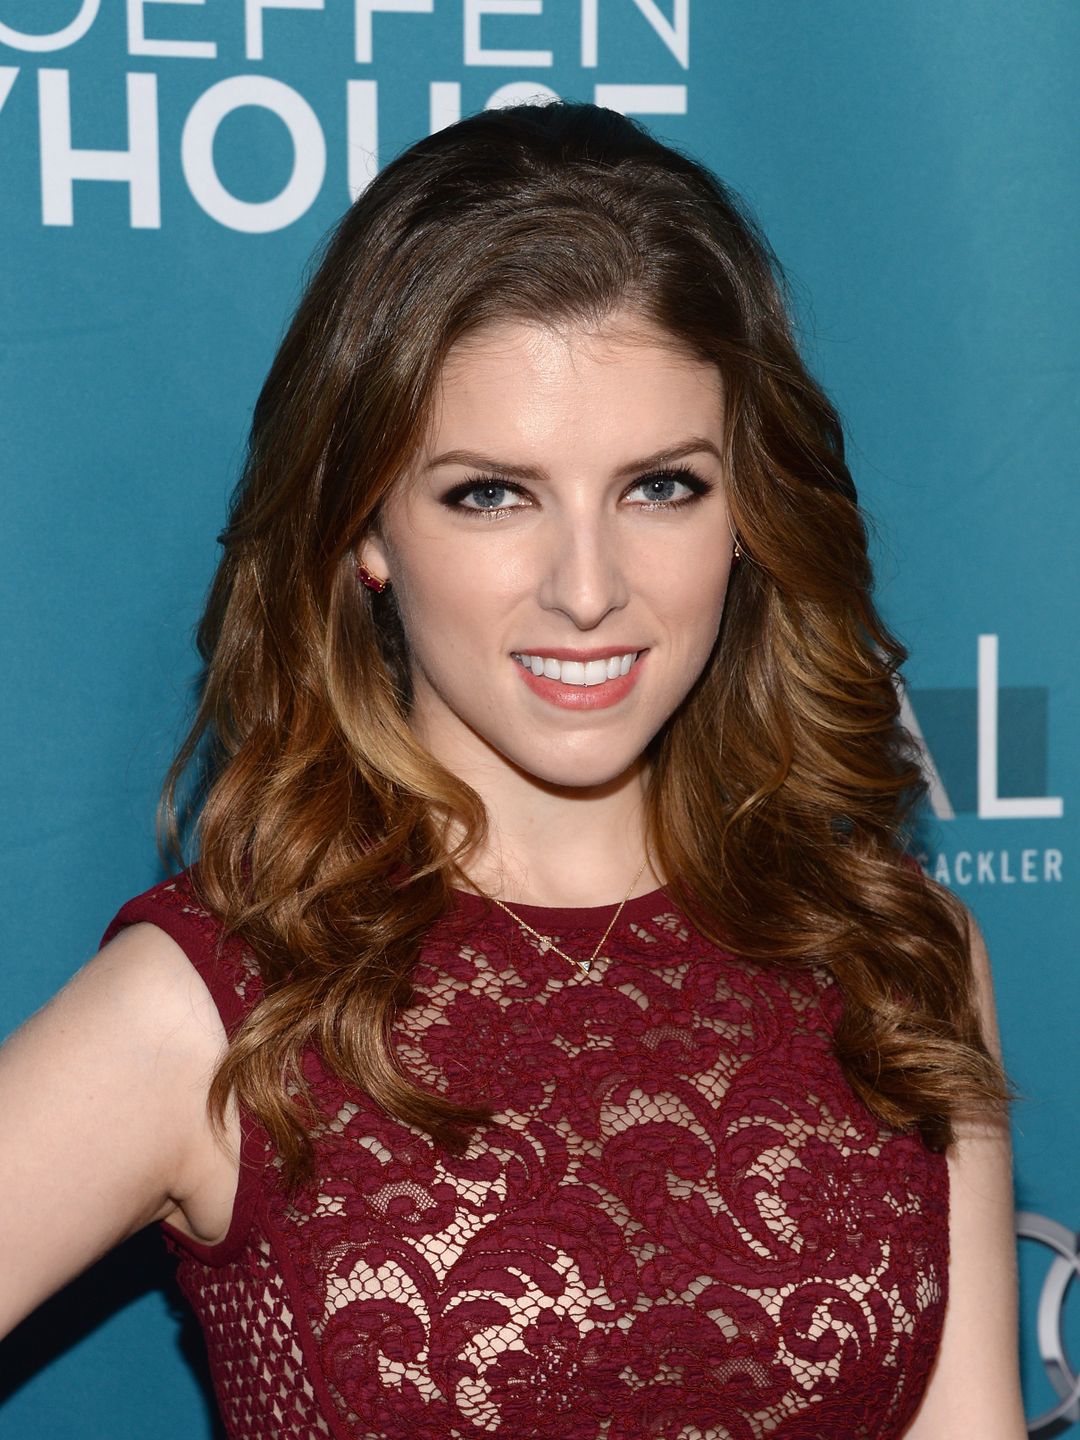 Anna Kendrick does she have a husband